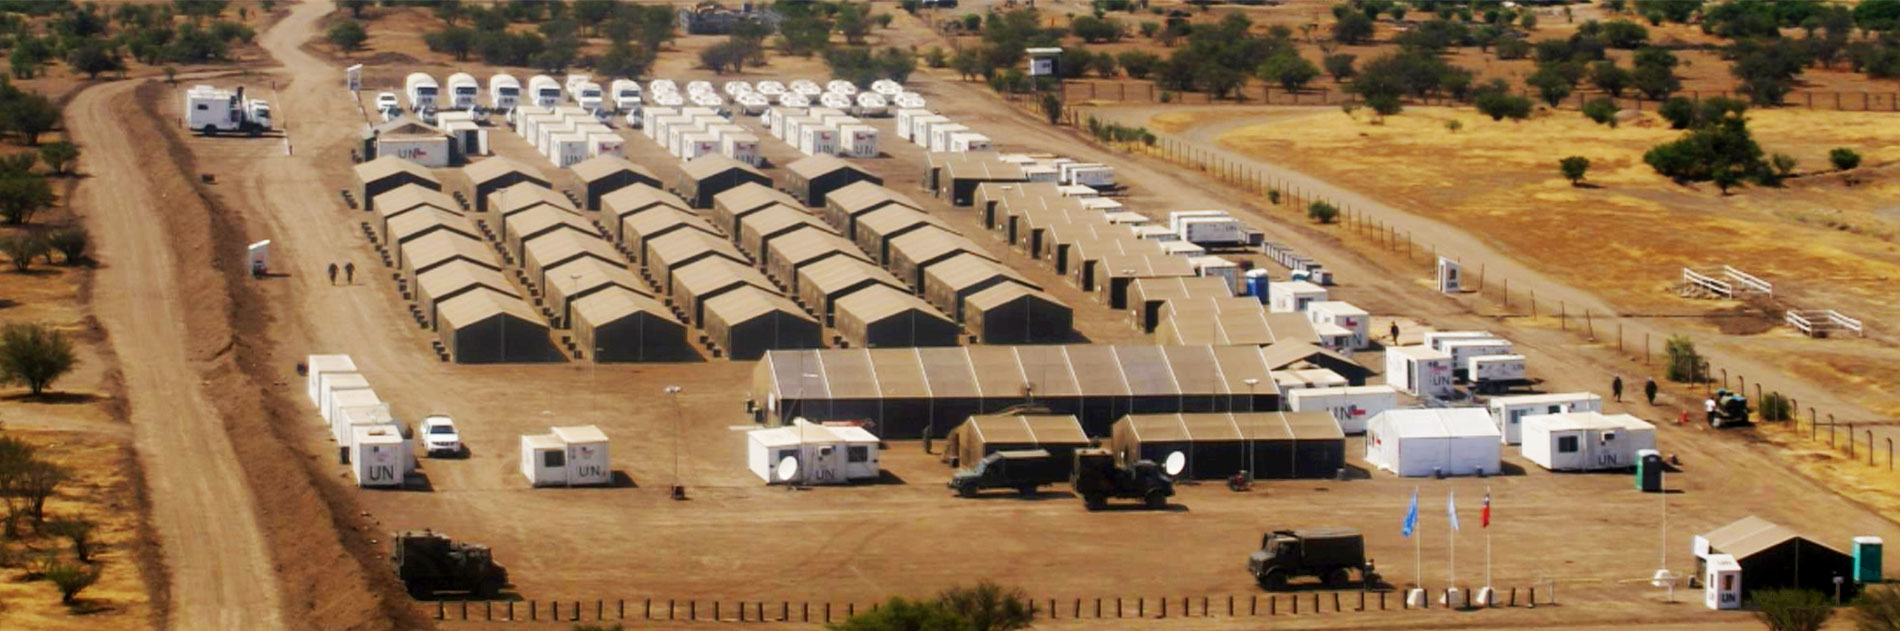 military-base-camp-shelter-system-soldier-sleeping-quarter-wards-military-storage-hospital-tents